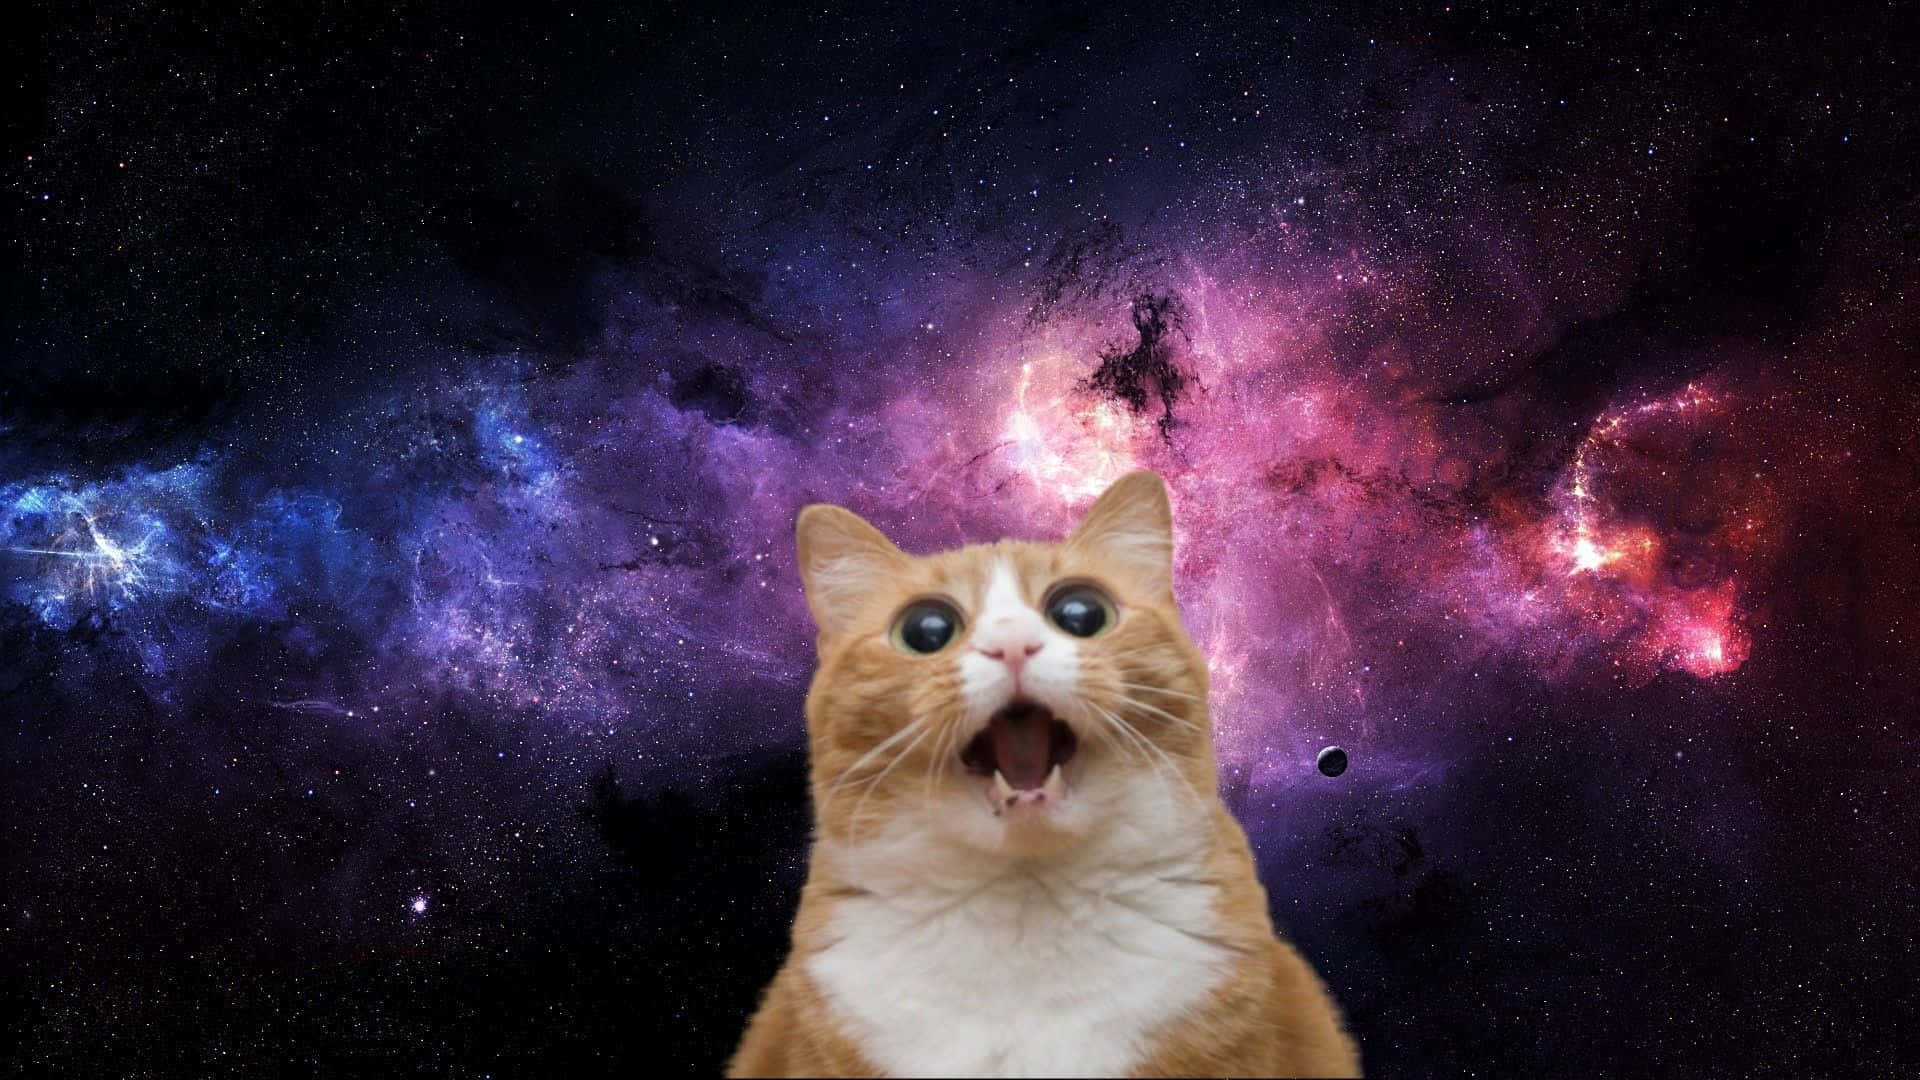 Launch your dreams - a cat reaching for the stars Wallpaper